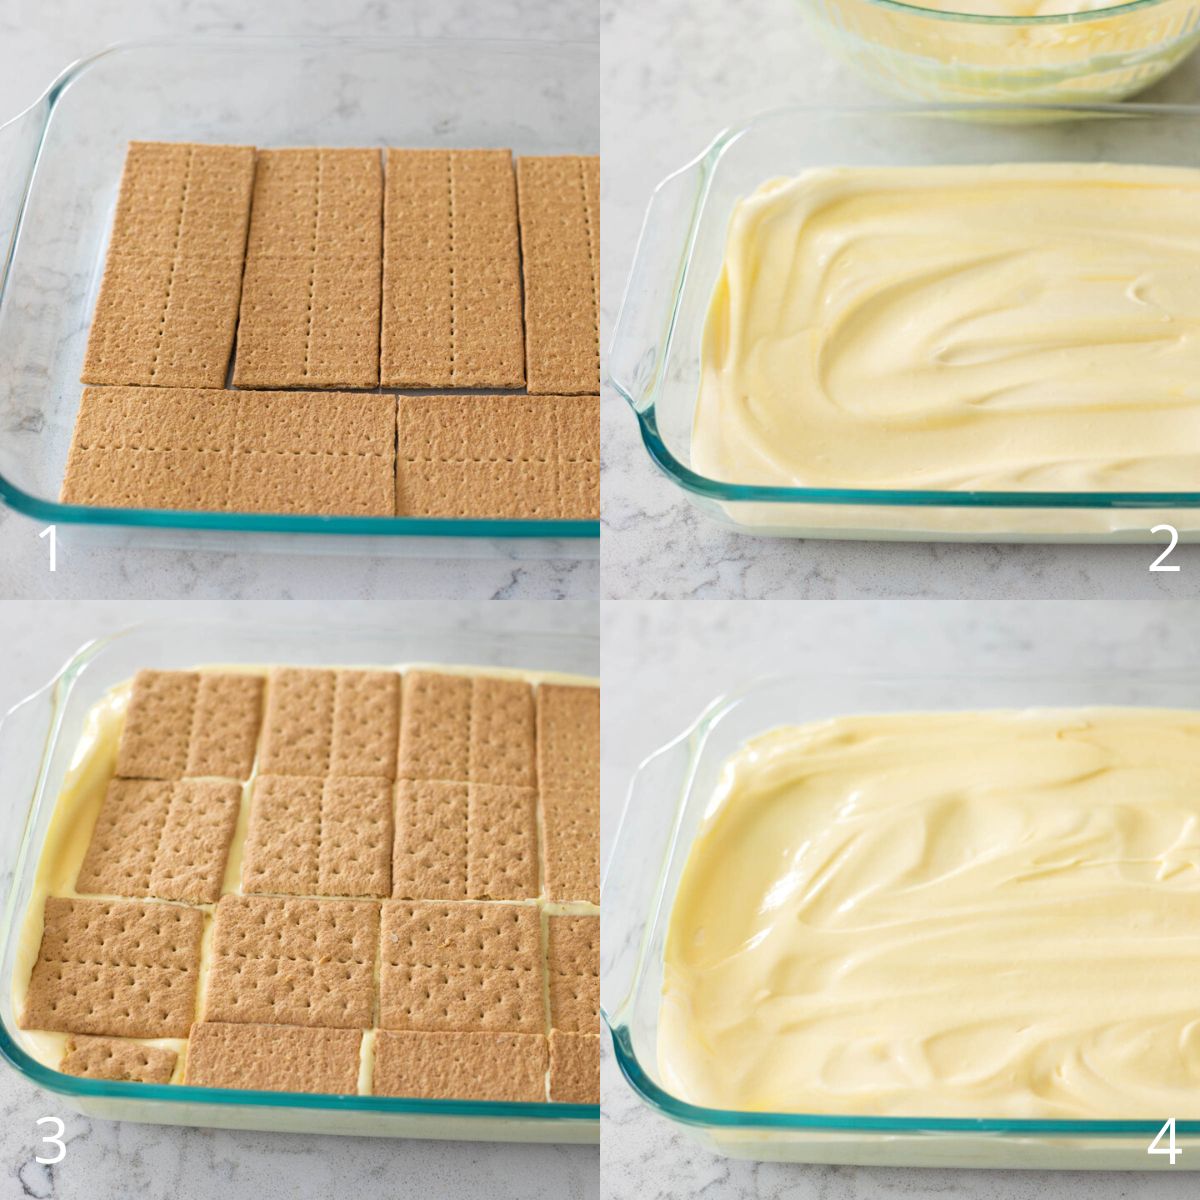 The graham crackers and pudding are layered in the dessert.